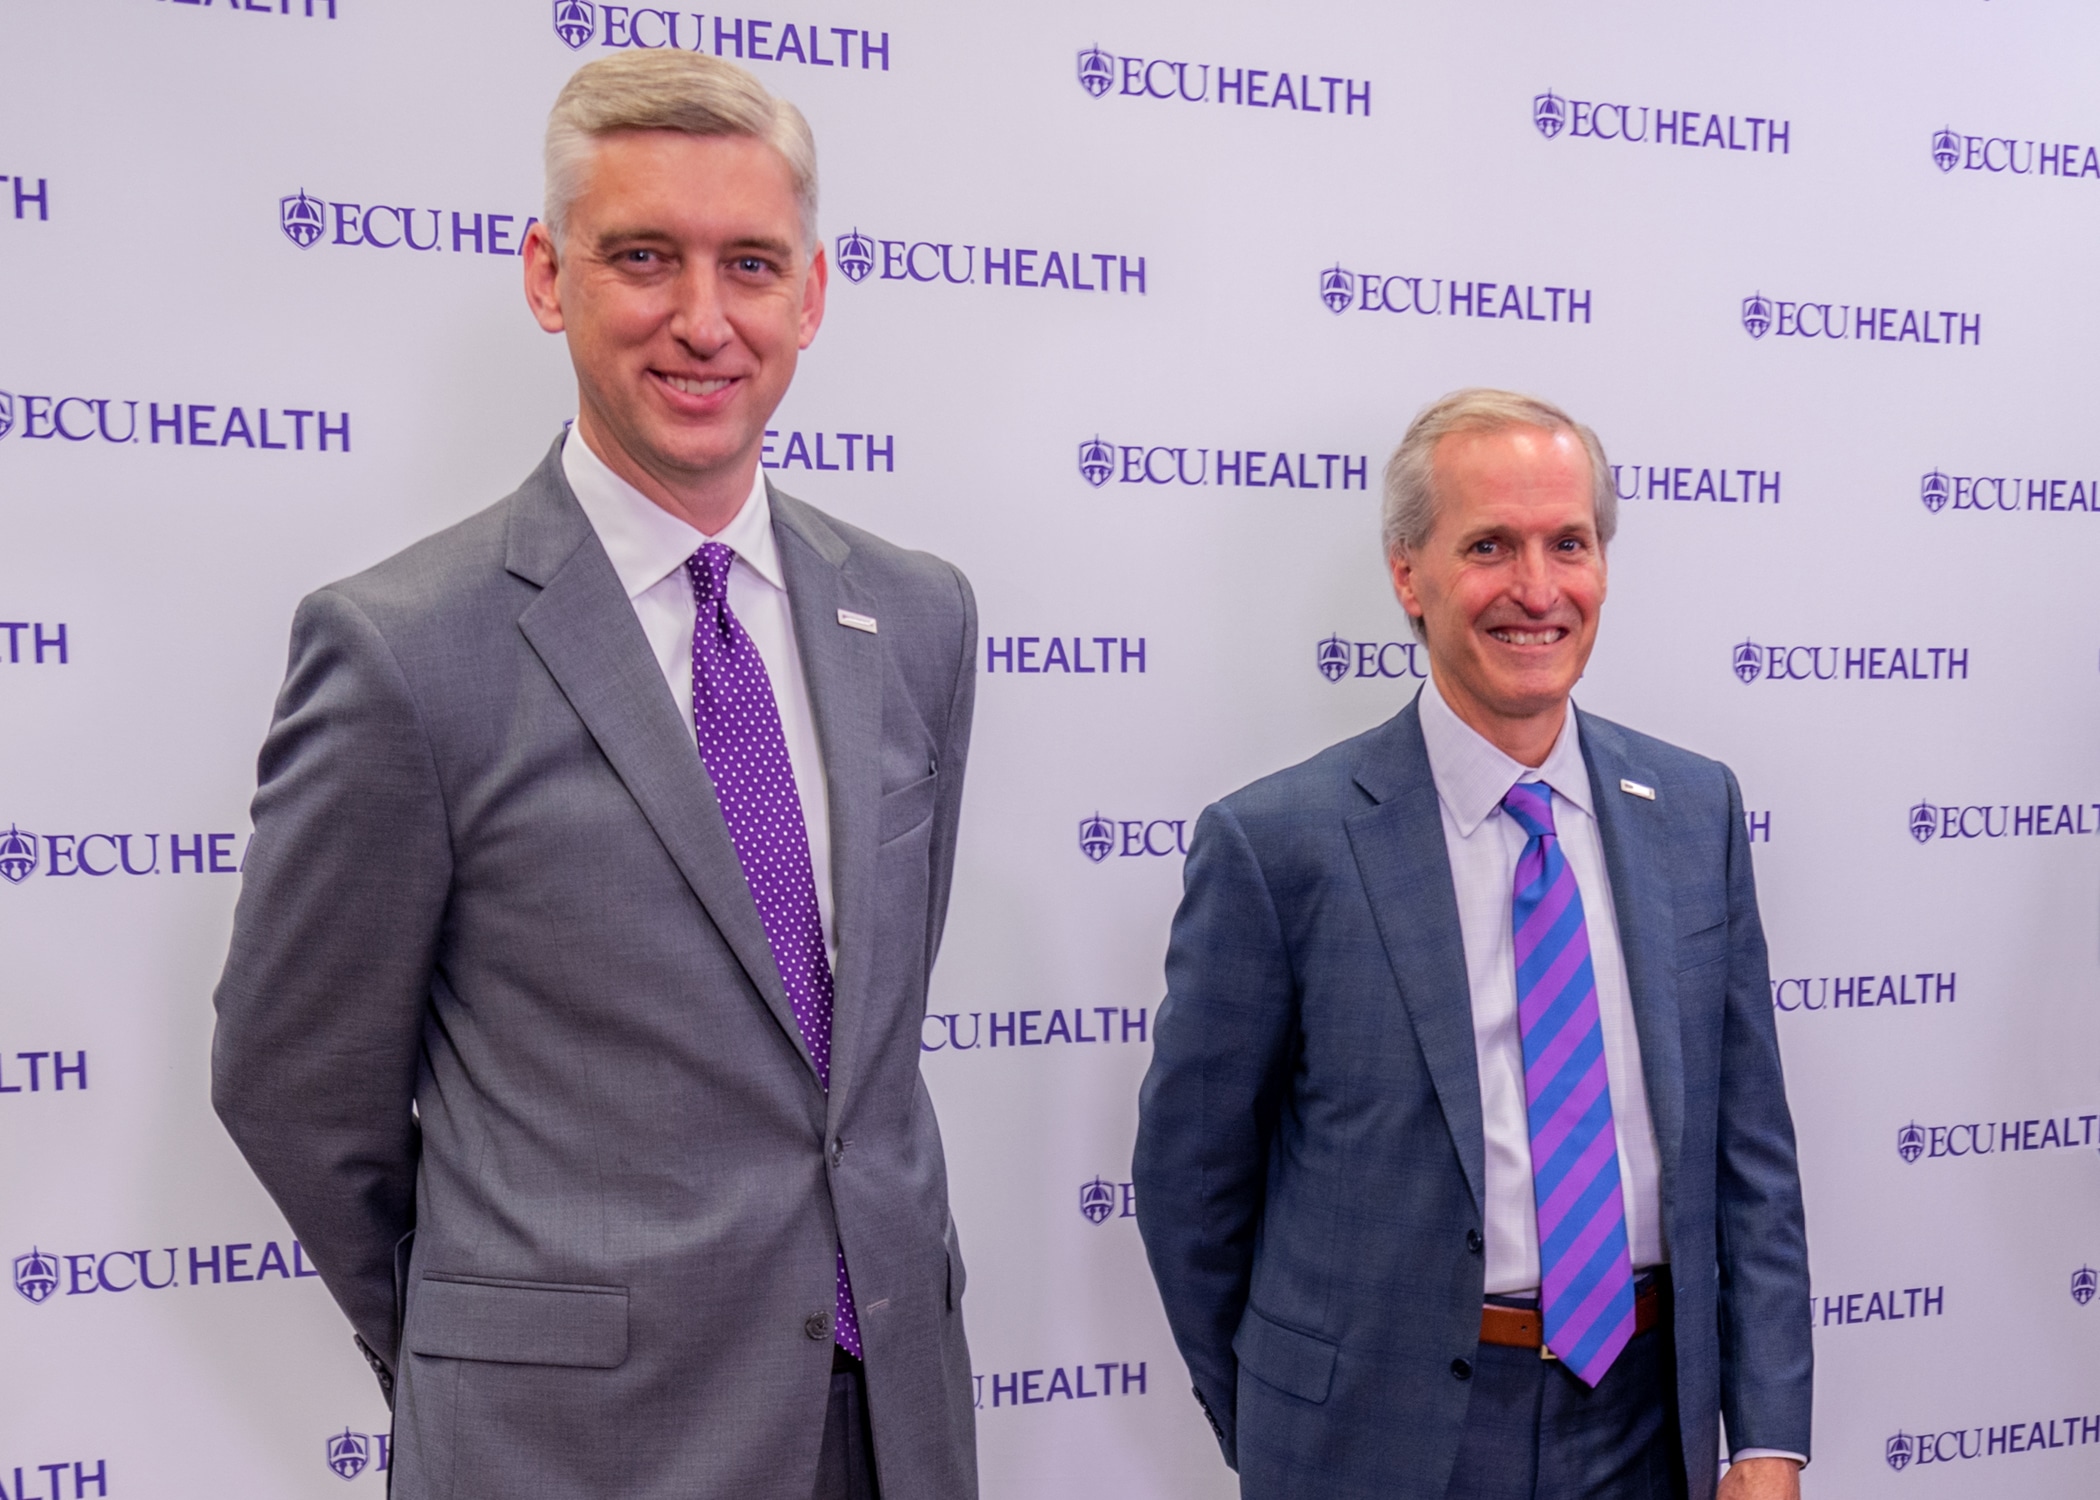 Philip Rogers and Dr. Michael Waldrum pose for a photo after a press conference unveiling ECU Health's new logo.